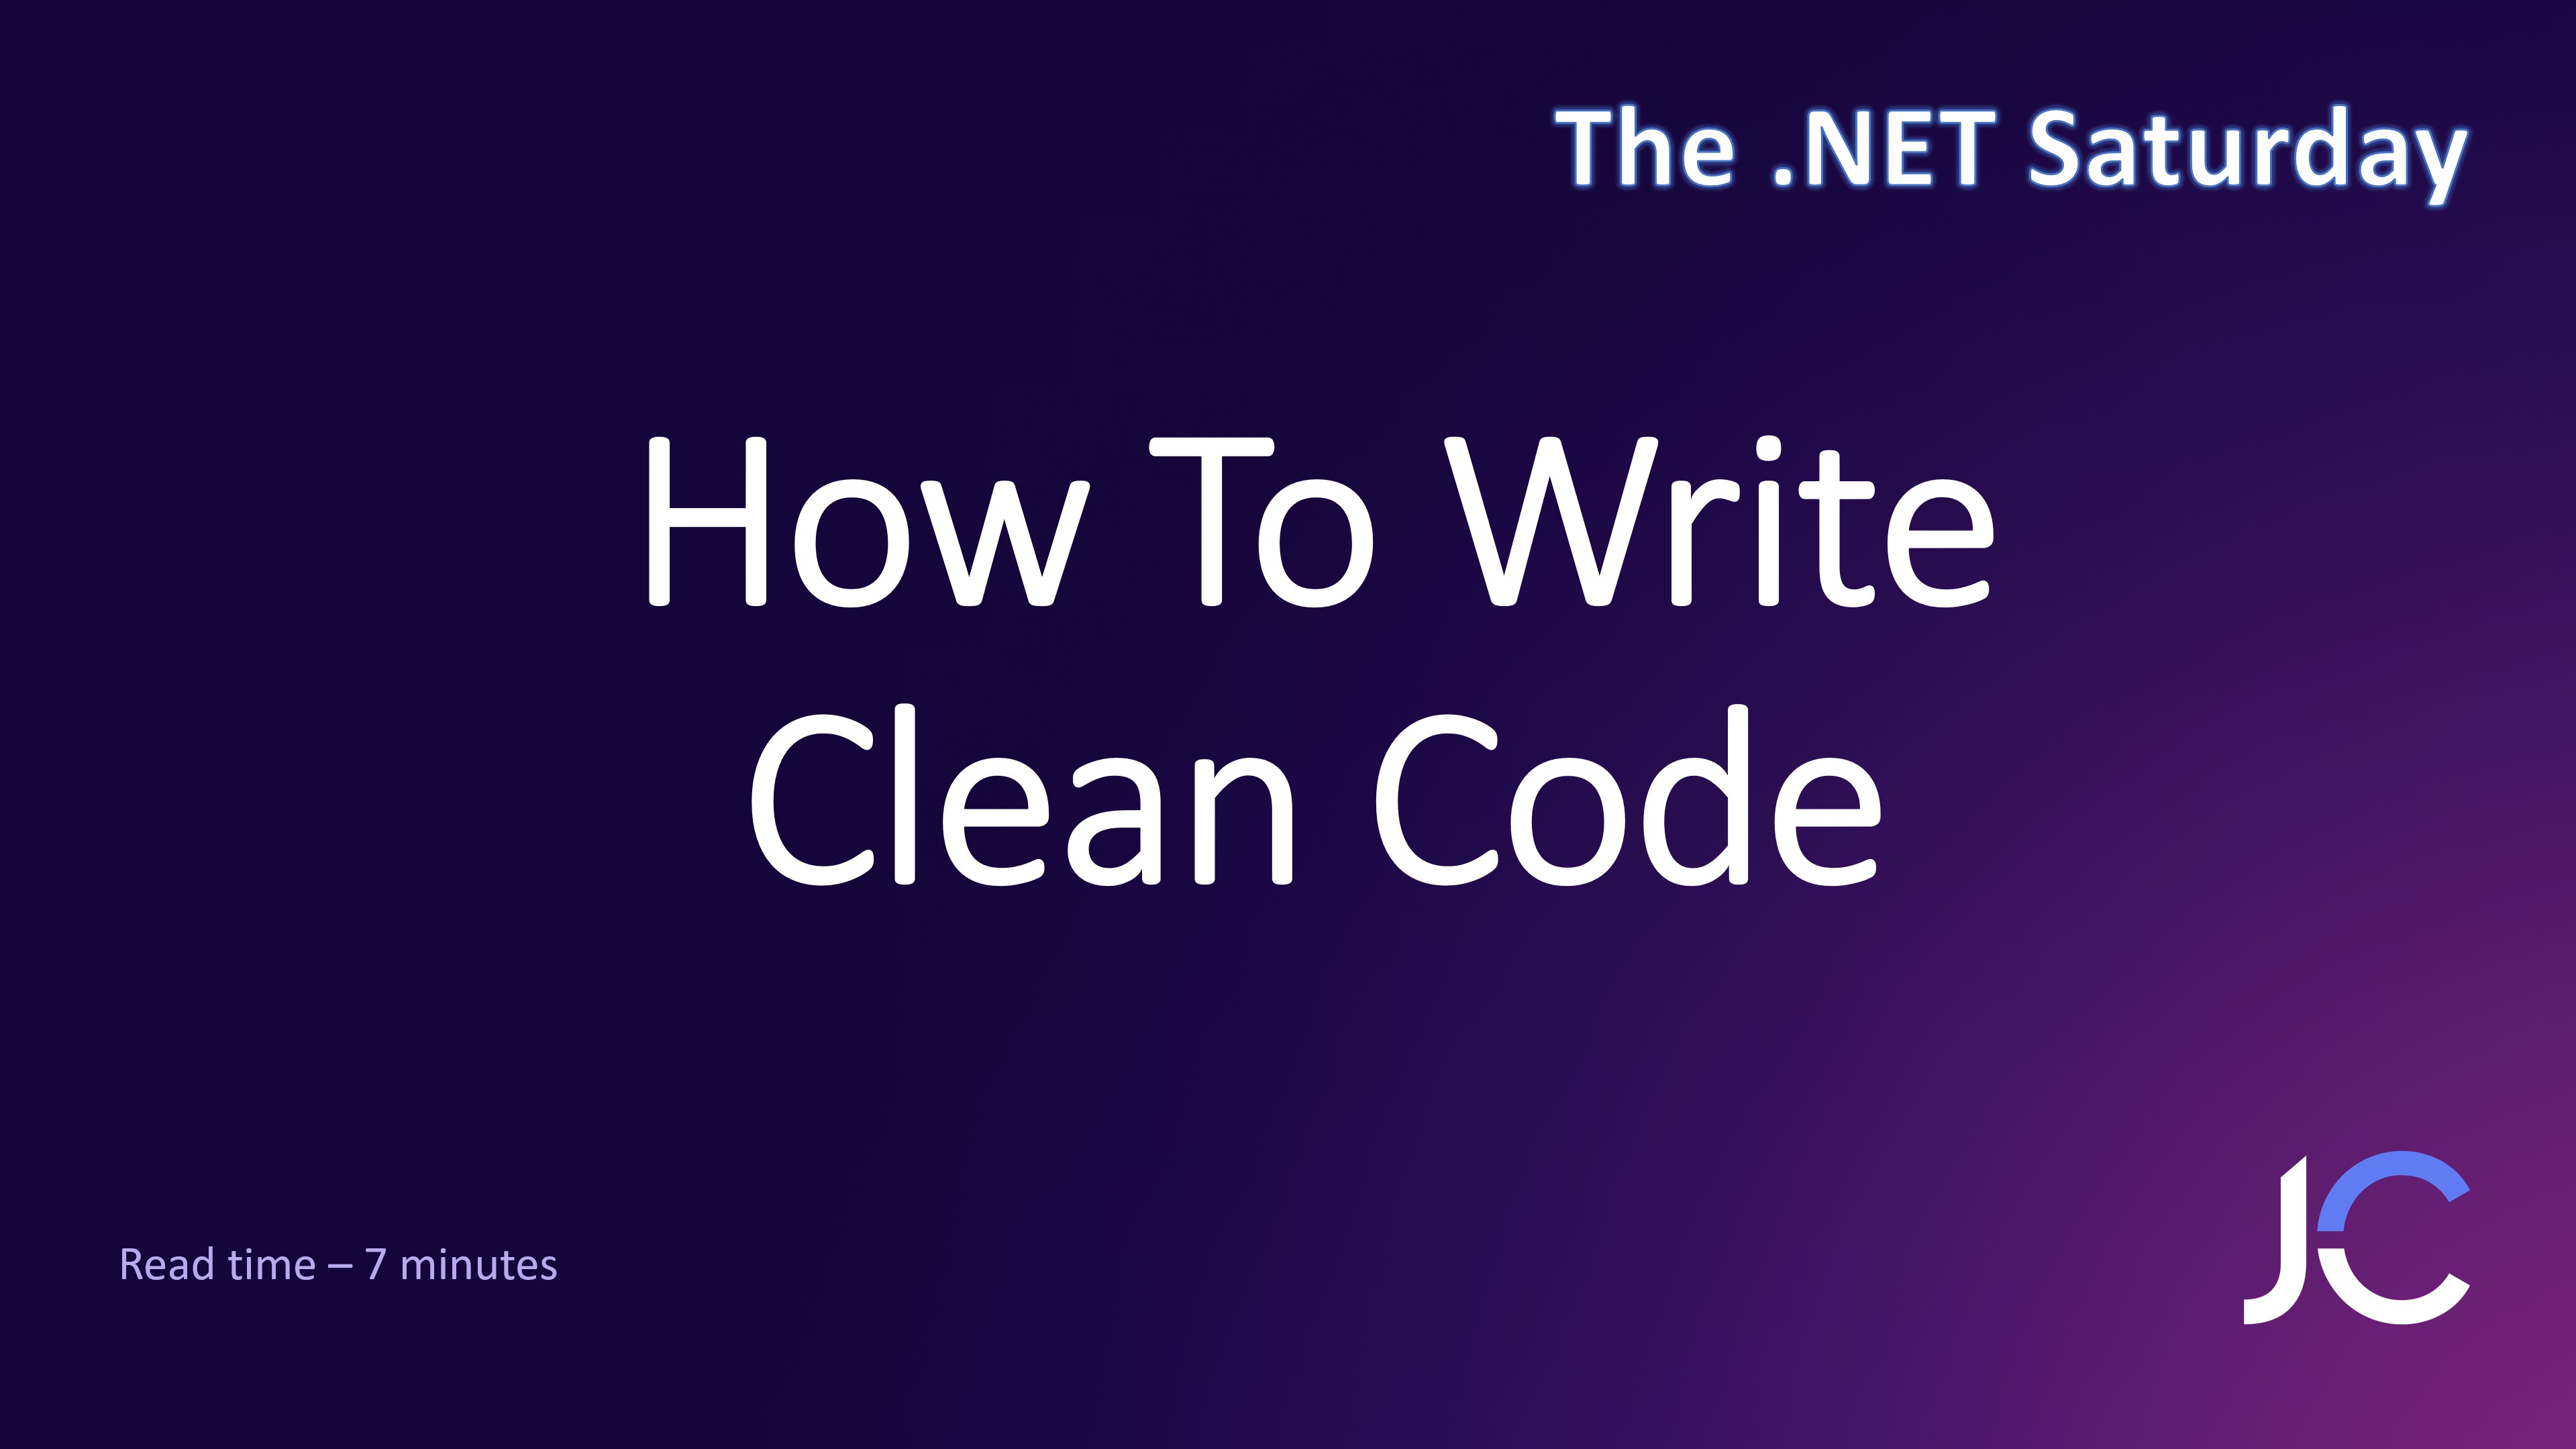 How To Write Clean Code